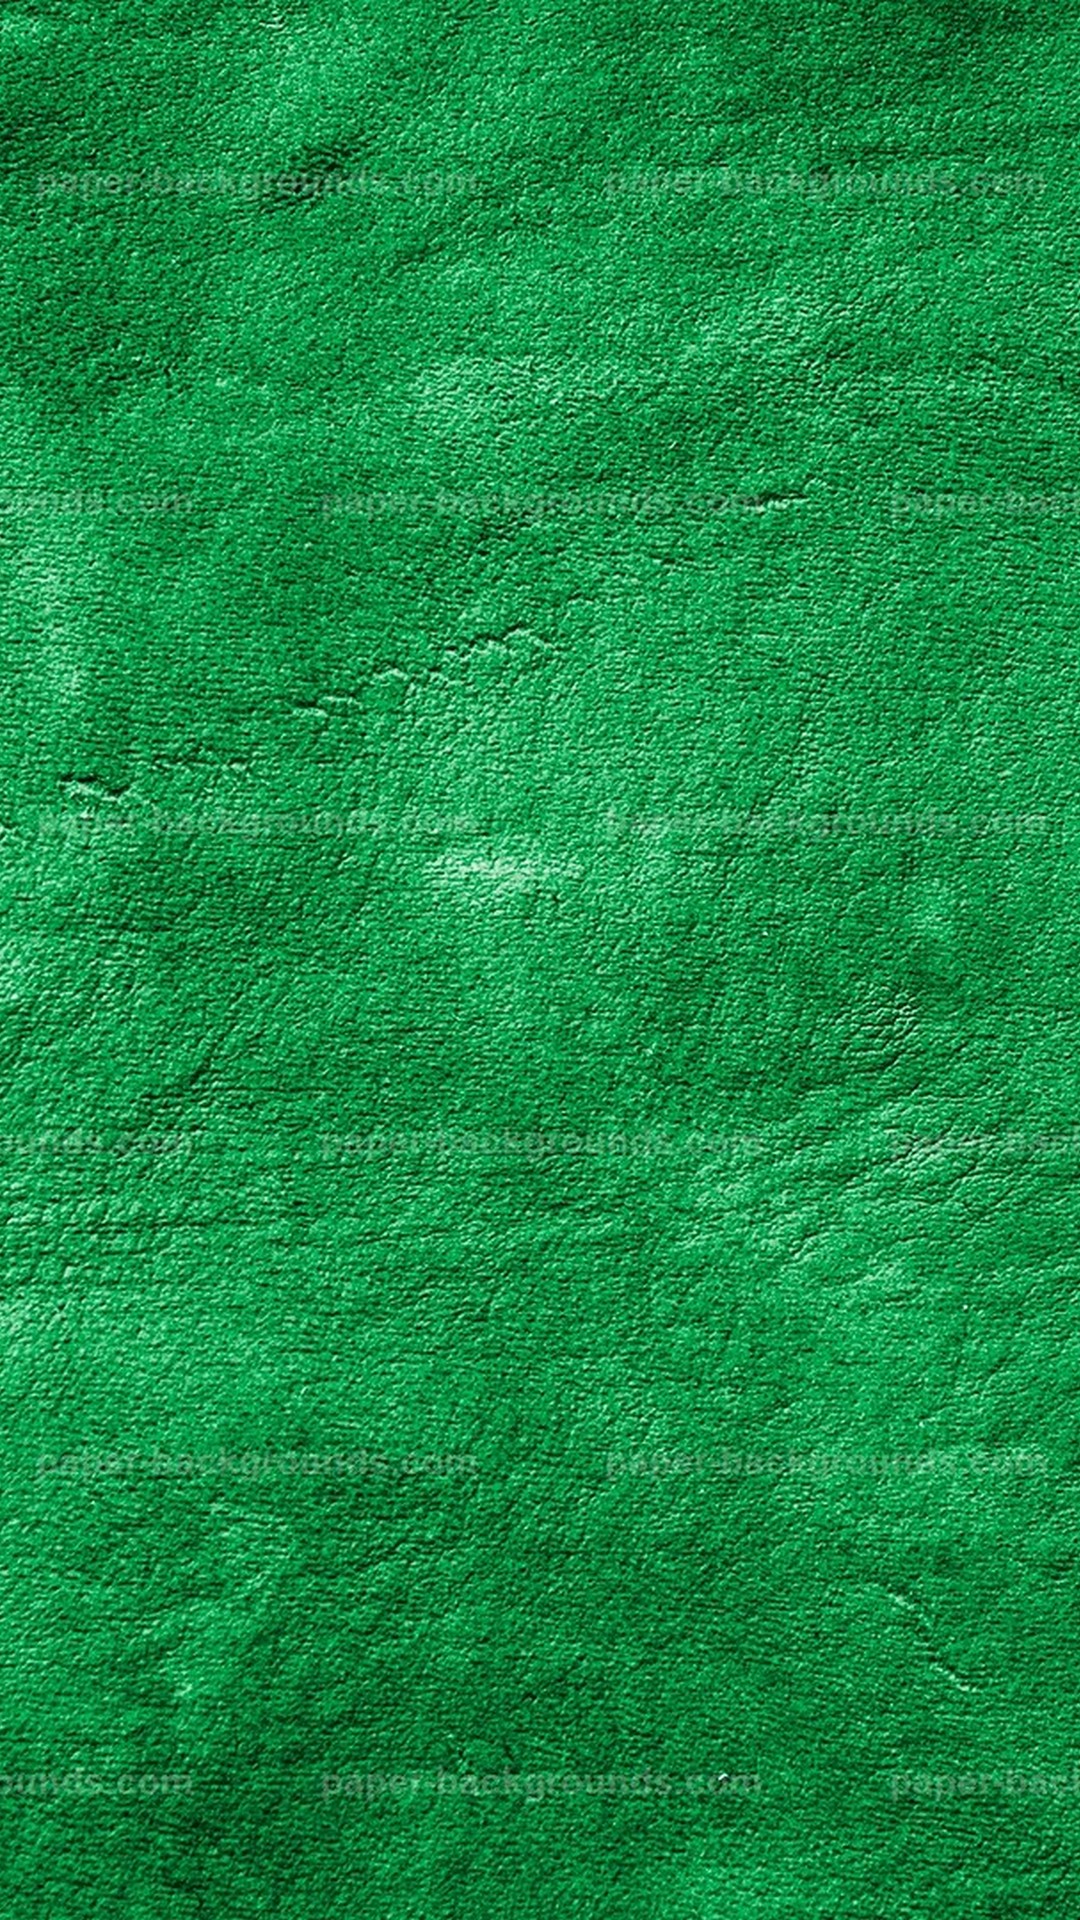 Android Wallpaper HD Emerald Green with image resolution 1080x1920 pixel. You can make this wallpaper for your Android backgrounds, Tablet, Smartphones Screensavers and Mobile Phone Lock Screen